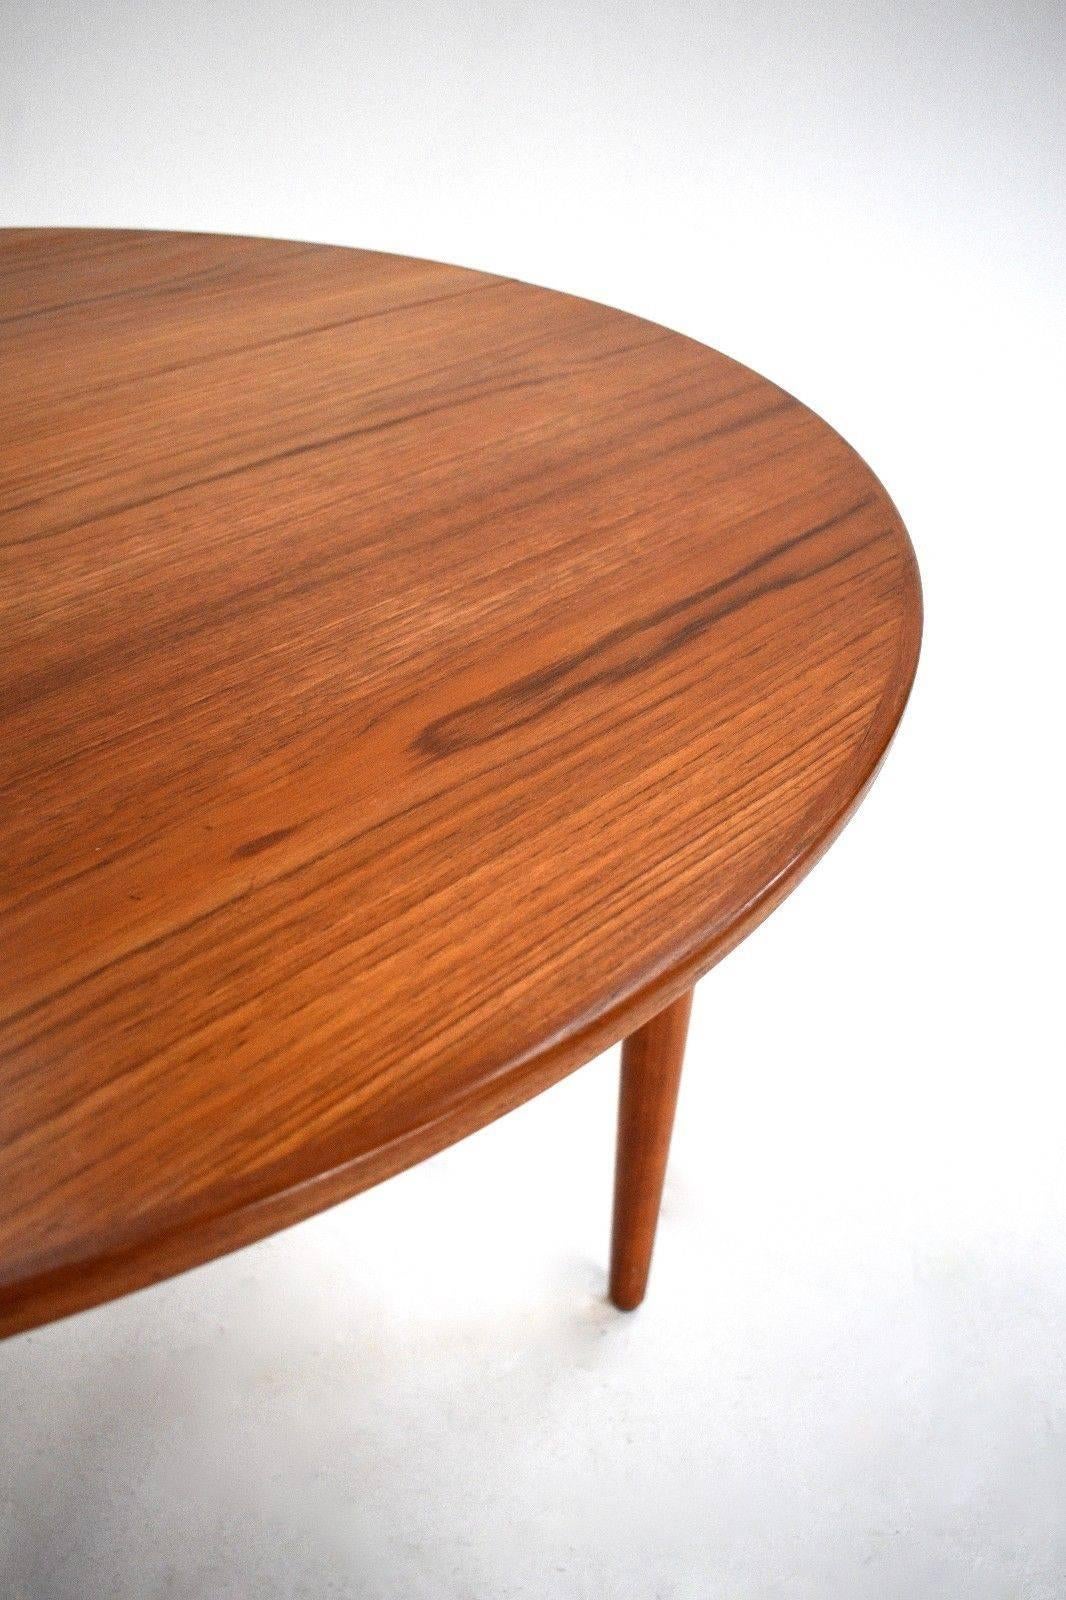 20th Century Danish Teak Circular Double Extending Dining Table Midcentury, 1960s For Sale